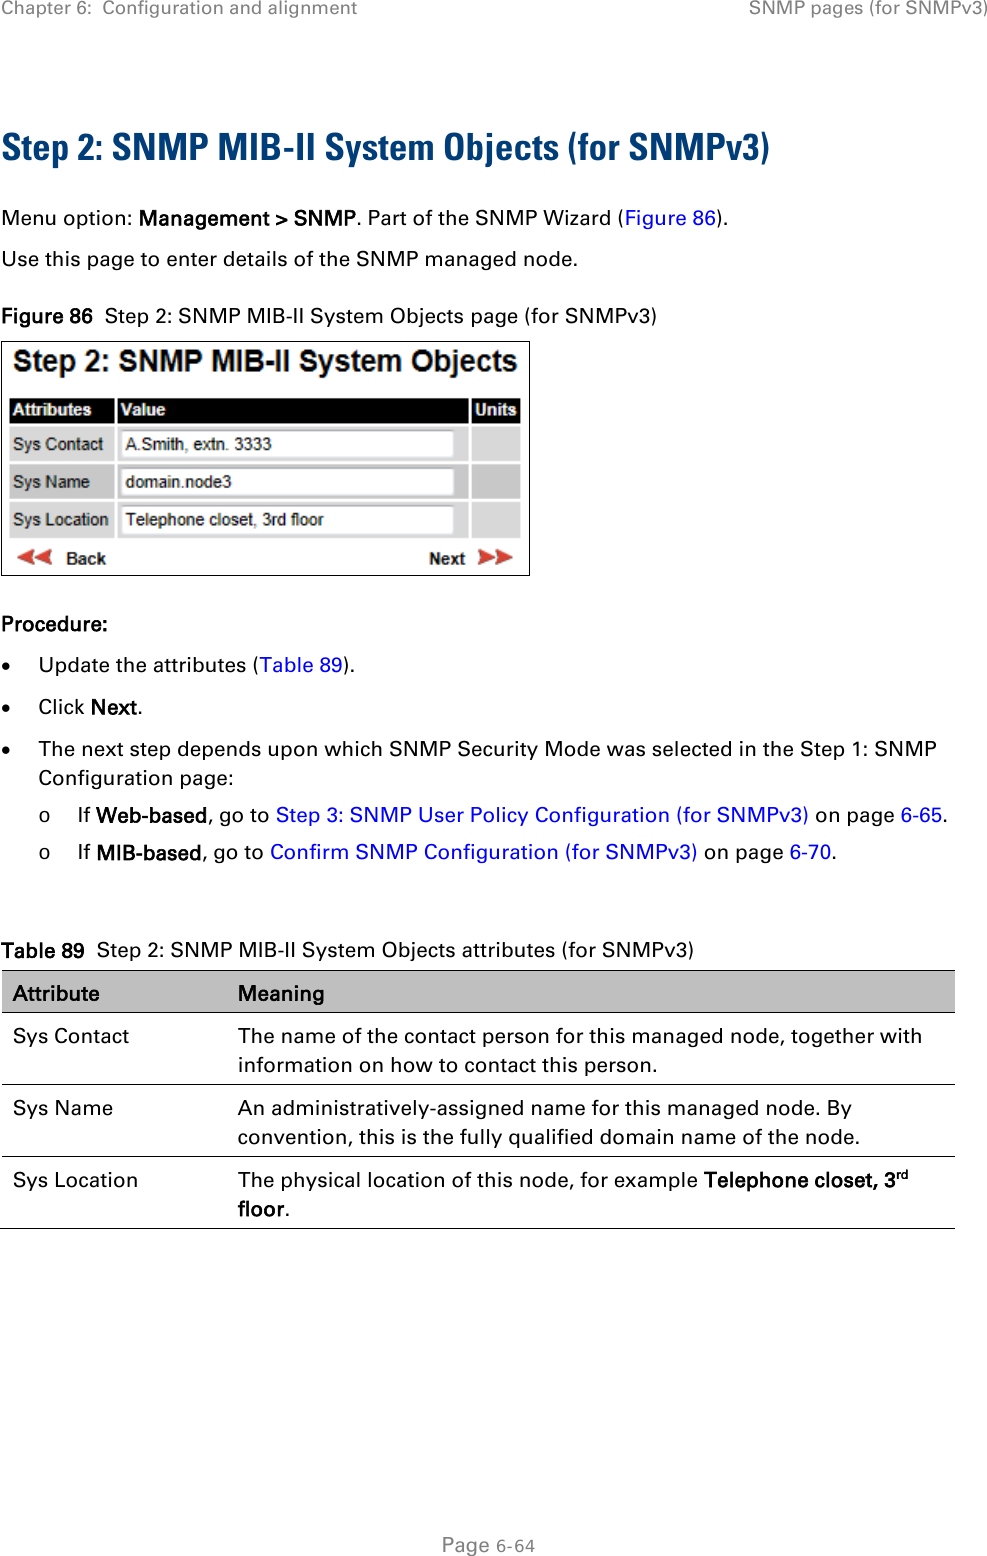 Chapter 6:  Configuration and alignment SNMP pages (for SNMPv3)  Step 2: SNMP MIB-II System Objects (for SNMPv3) Menu option: Management &gt; SNMP. Part of the SNMP Wizard (Figure 86). Use this page to enter details of the SNMP managed node. Figure 86  Step 2: SNMP MIB-II System Objects page (for SNMPv3)  Procedure: • Update the attributes (Table 89). • Click Next. • The next step depends upon which SNMP Security Mode was selected in the Step 1: SNMP Configuration page: o If Web-based, go to Step 3: SNMP User Policy Configuration (for SNMPv3) on page 6-65. o If MIB-based, go to Confirm SNMP Configuration (for SNMPv3) on page 6-70.  Table 89  Step 2: SNMP MIB-II System Objects attributes (for SNMPv3) Attribute Meaning Sys Contact The name of the contact person for this managed node, together with information on how to contact this person. Sys Name An administratively-assigned name for this managed node. By convention, this is the fully qualified domain name of the node. Sys Location The physical location of this node, for example Telephone closet, 3rd floor.    Page 6-64 